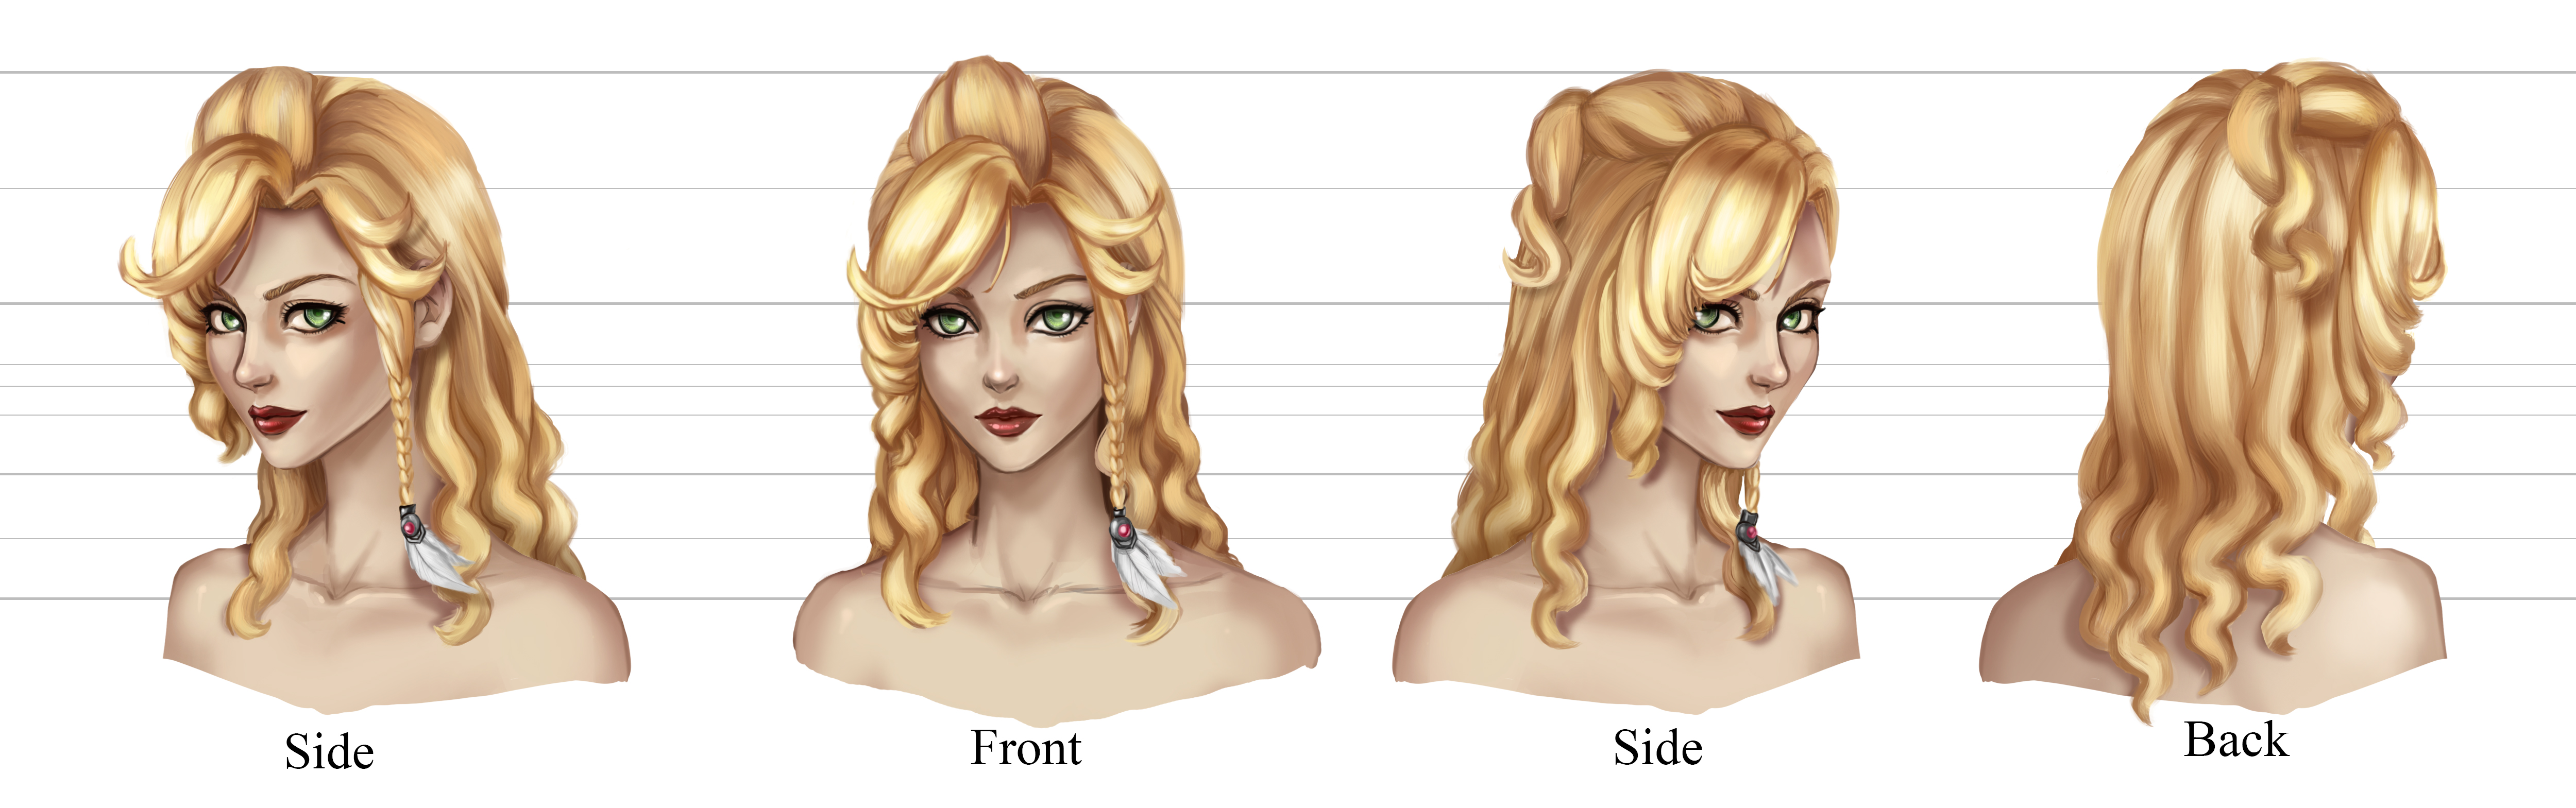 Final Fantasy 14 Hairstyle contest by Tropic02 on DeviantArt